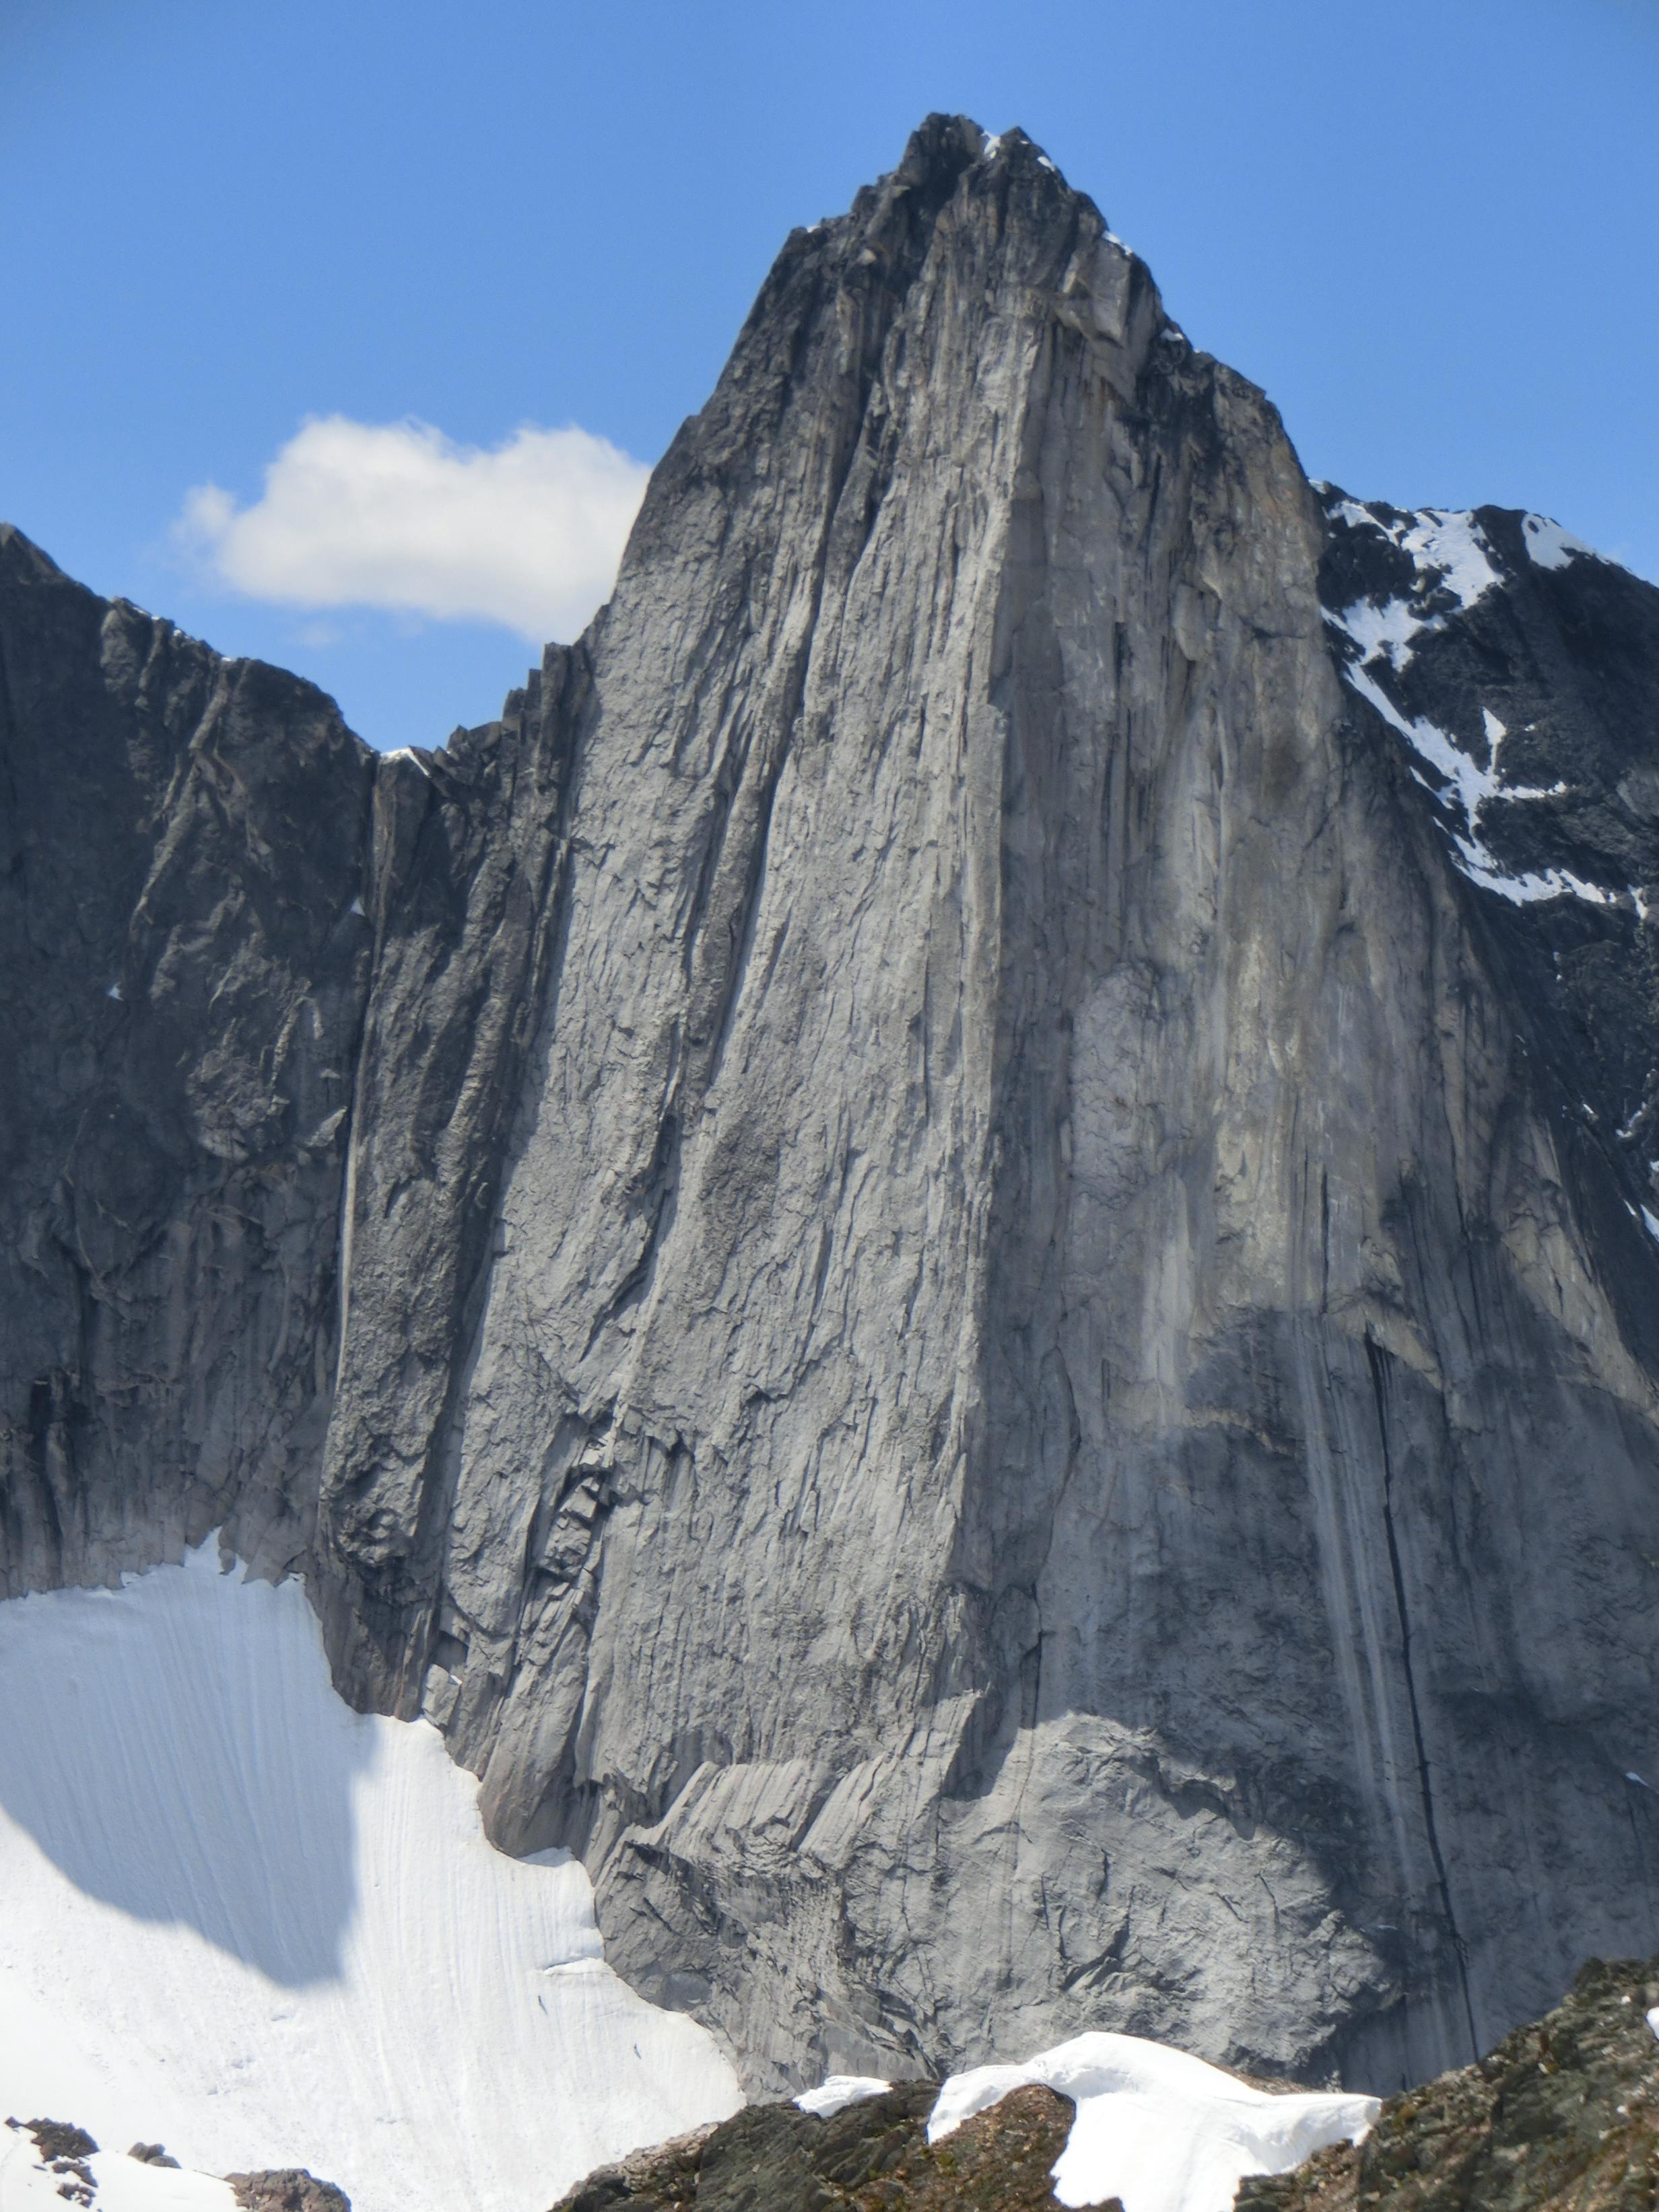 Wall Tower as viewed from the north shoulder of Hall Peak. The group climbed a line just left of the prominent arete in the center of the frame. [Photo] Kale Semar